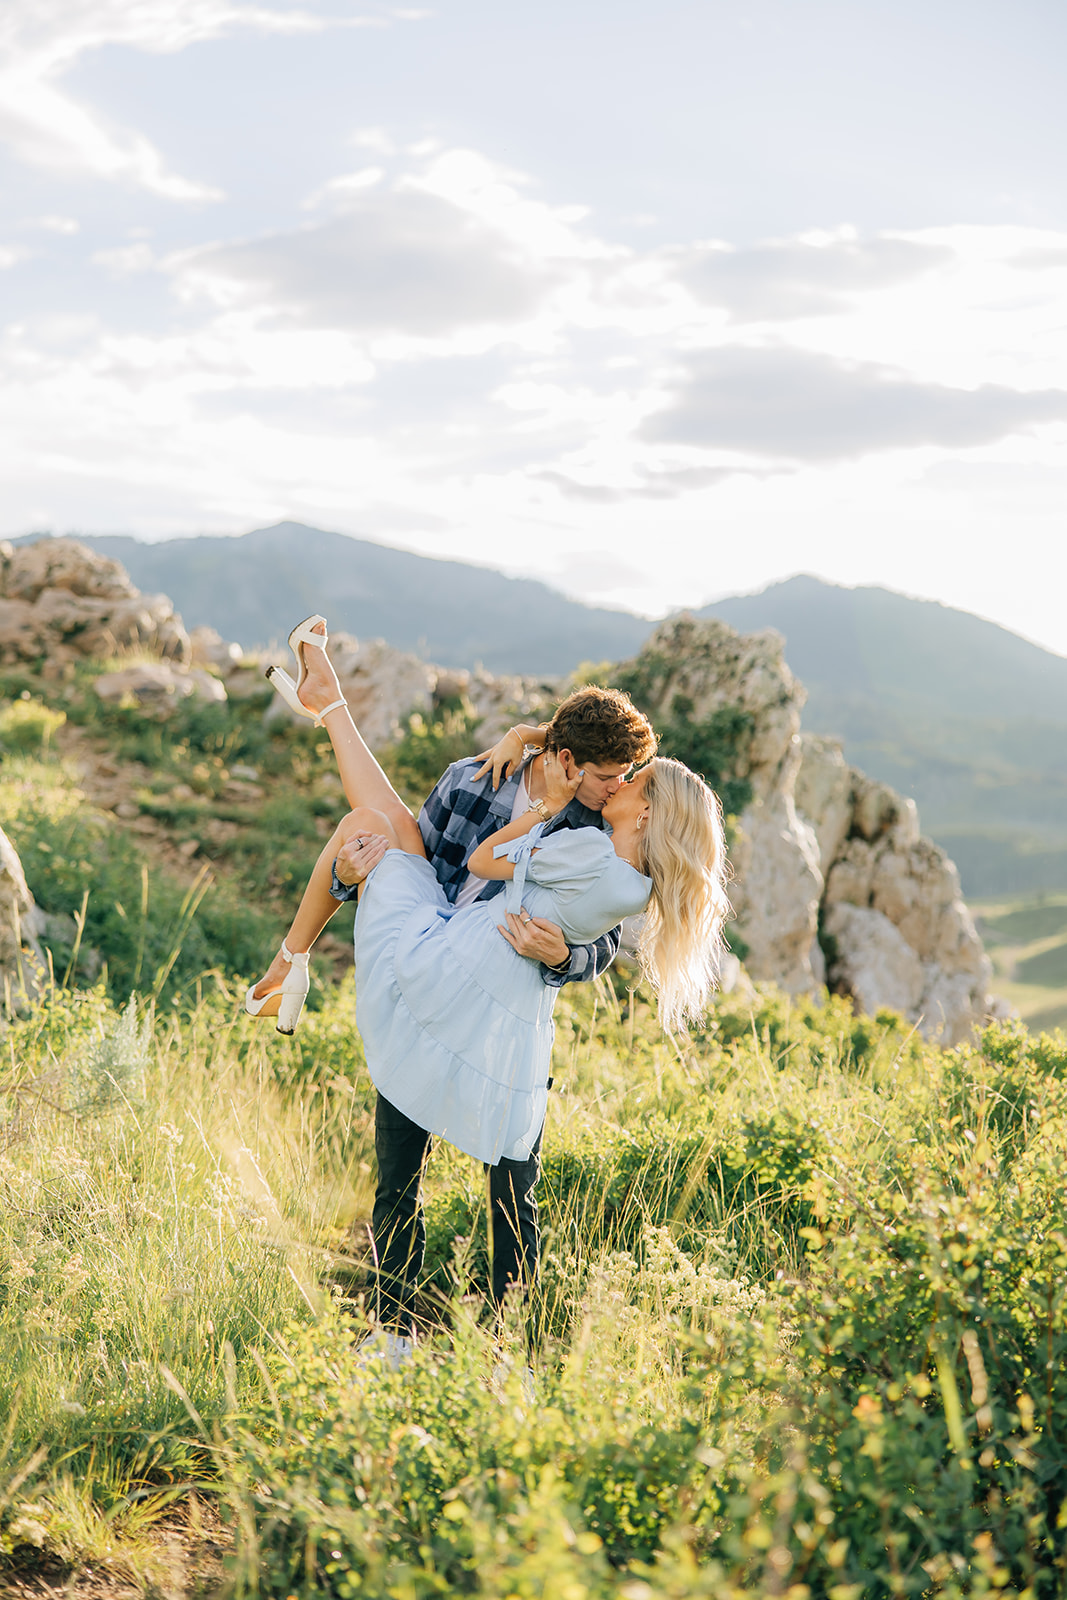 wedding photographer in utah, engagements in mountains